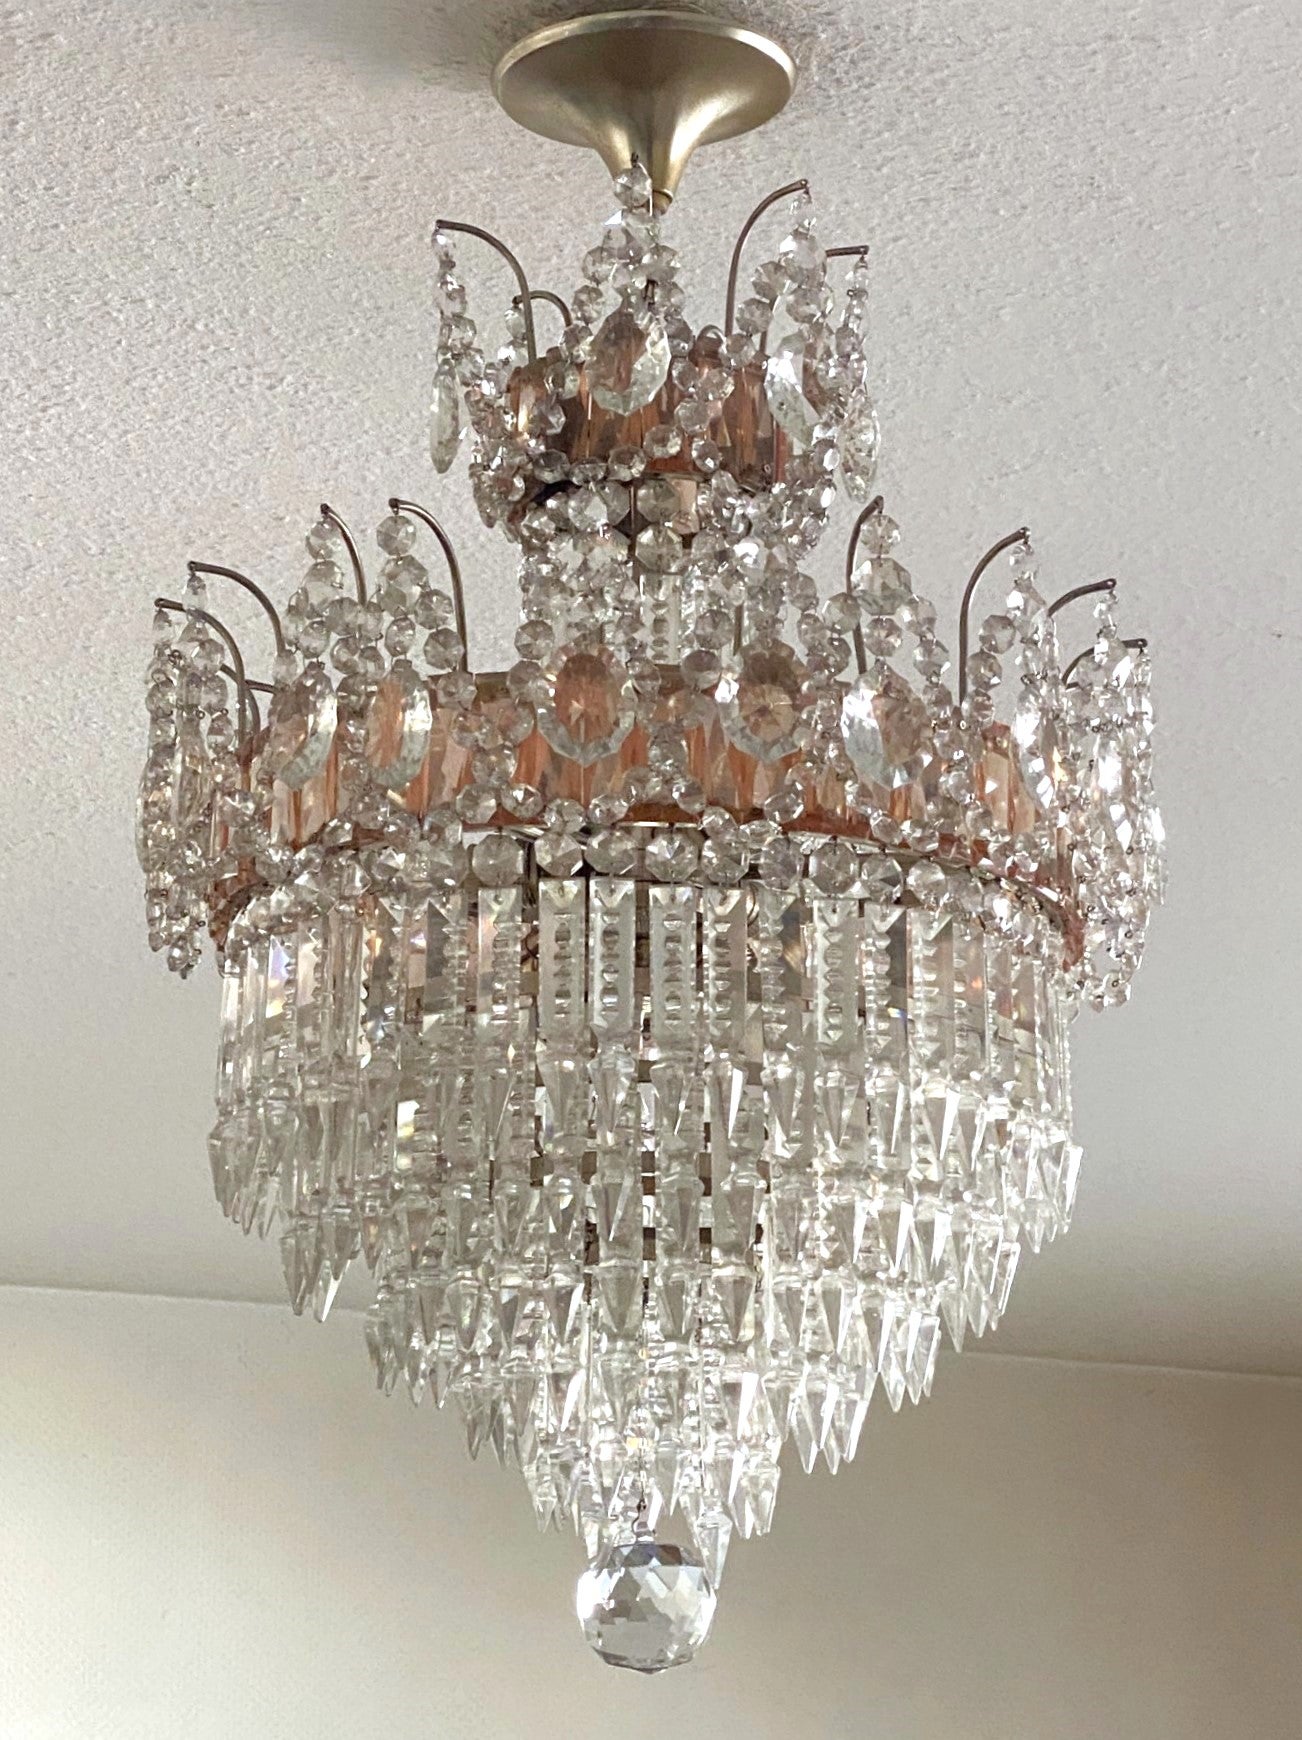 French Cut Clear Pink Crystal Waterfall Seven-Light Flush Mount Chandelier 1930s (Art déco) im Angebot